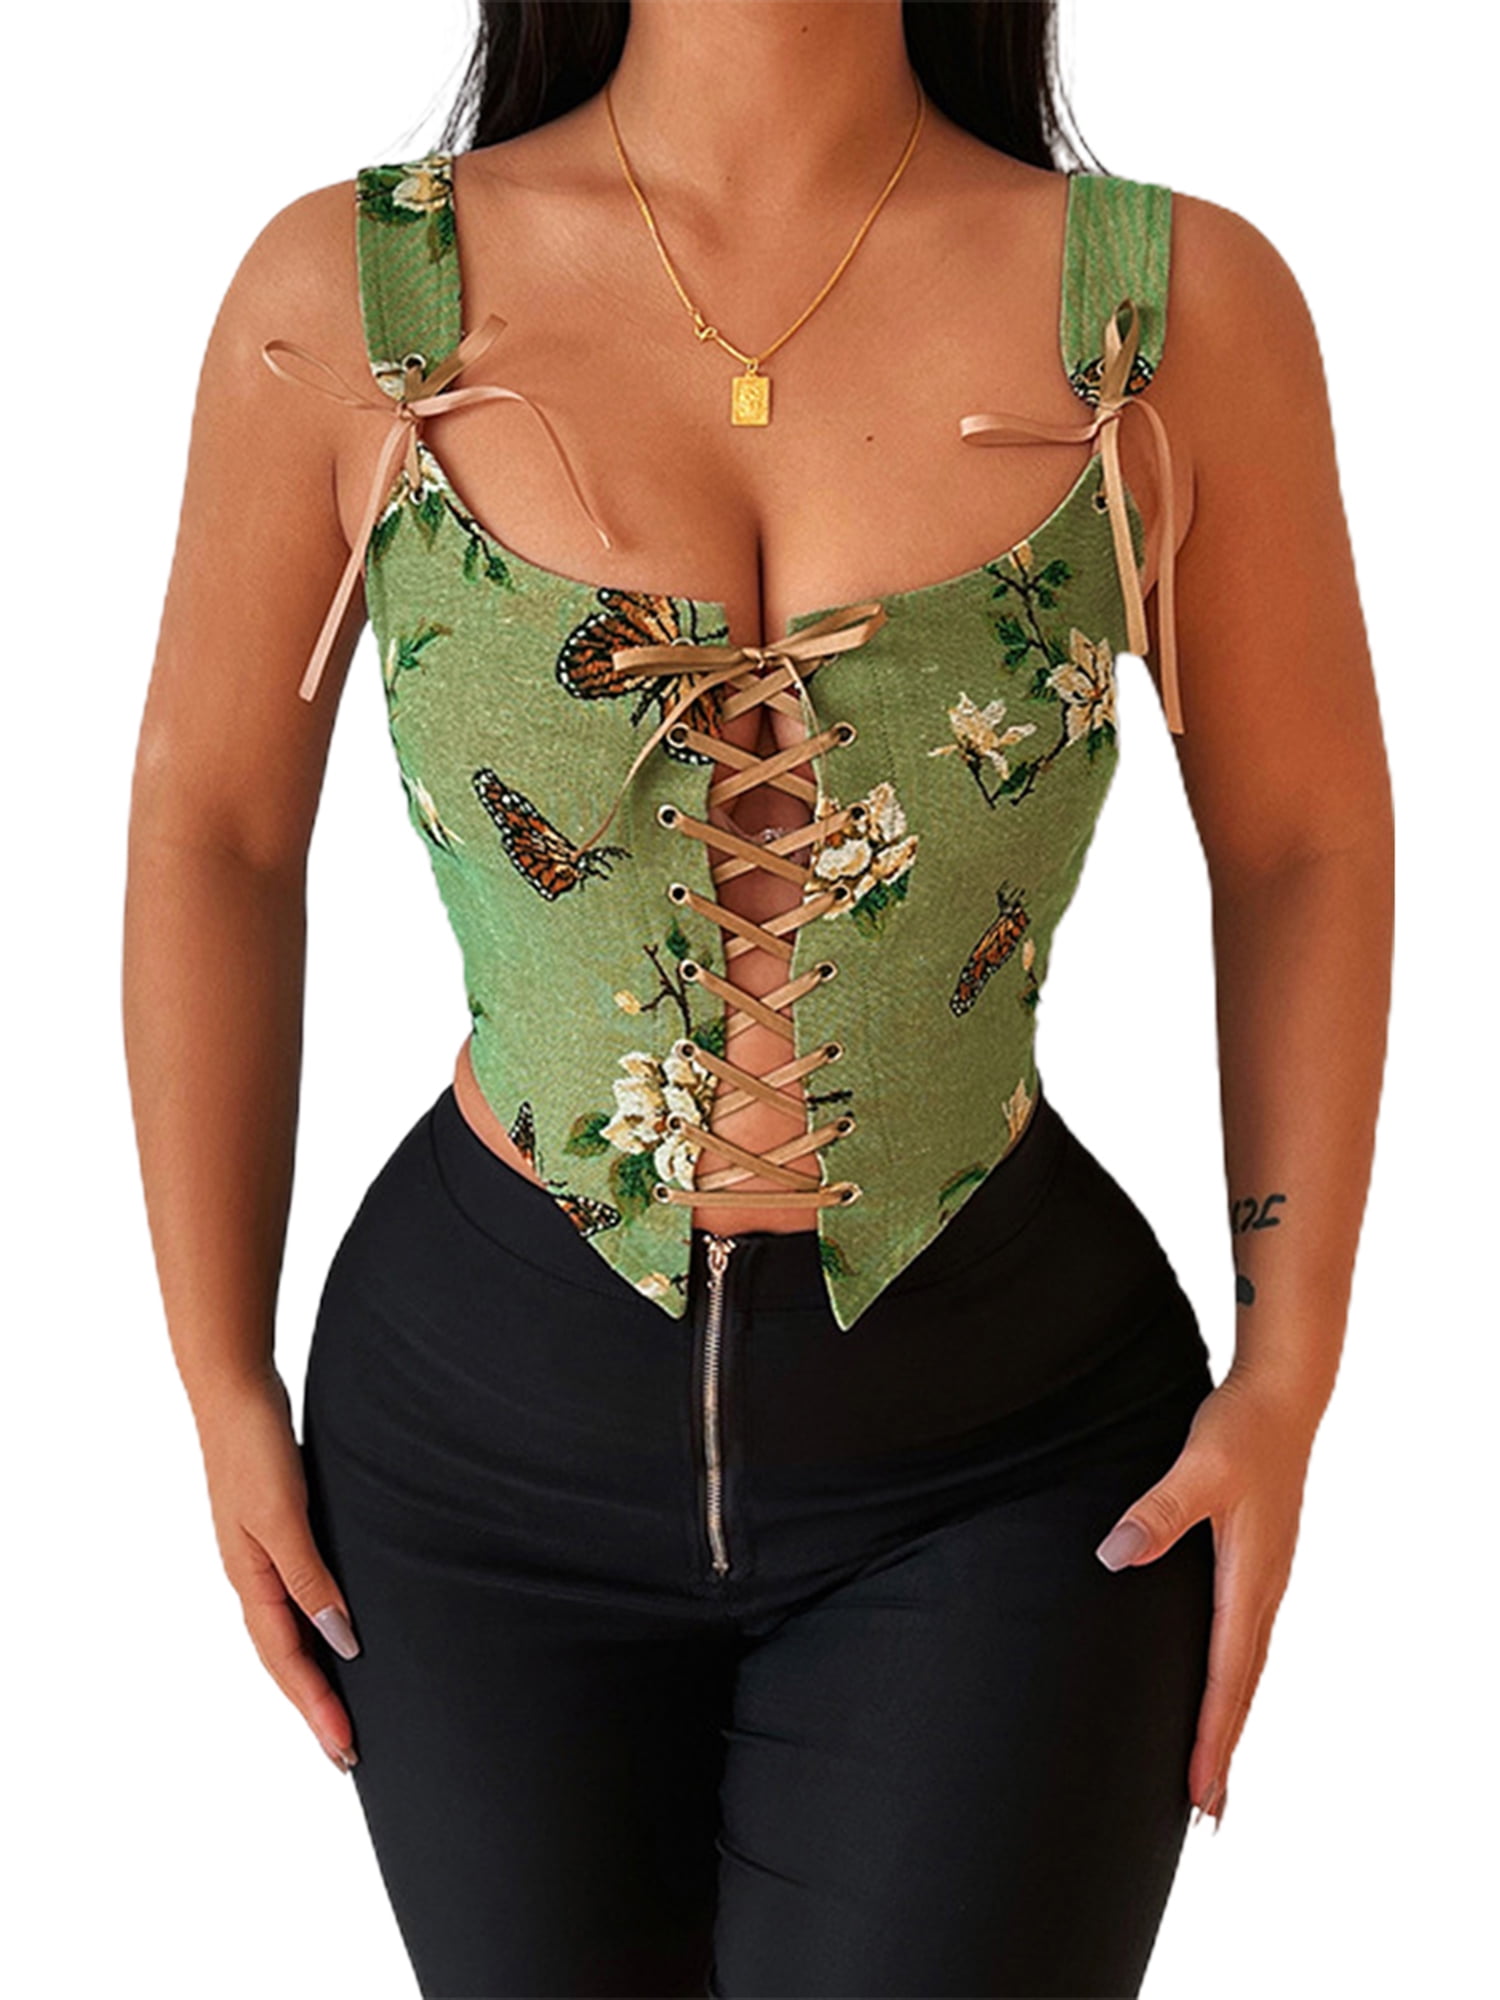  Womens Floral Print Strappy Corset Bustier Front Lace-up Slim  Camisole Crop Top Retro Elastic Waist Belt Bodyshaper Tank (Colorful,  Small) : Clothing, Shoes & Jewelry